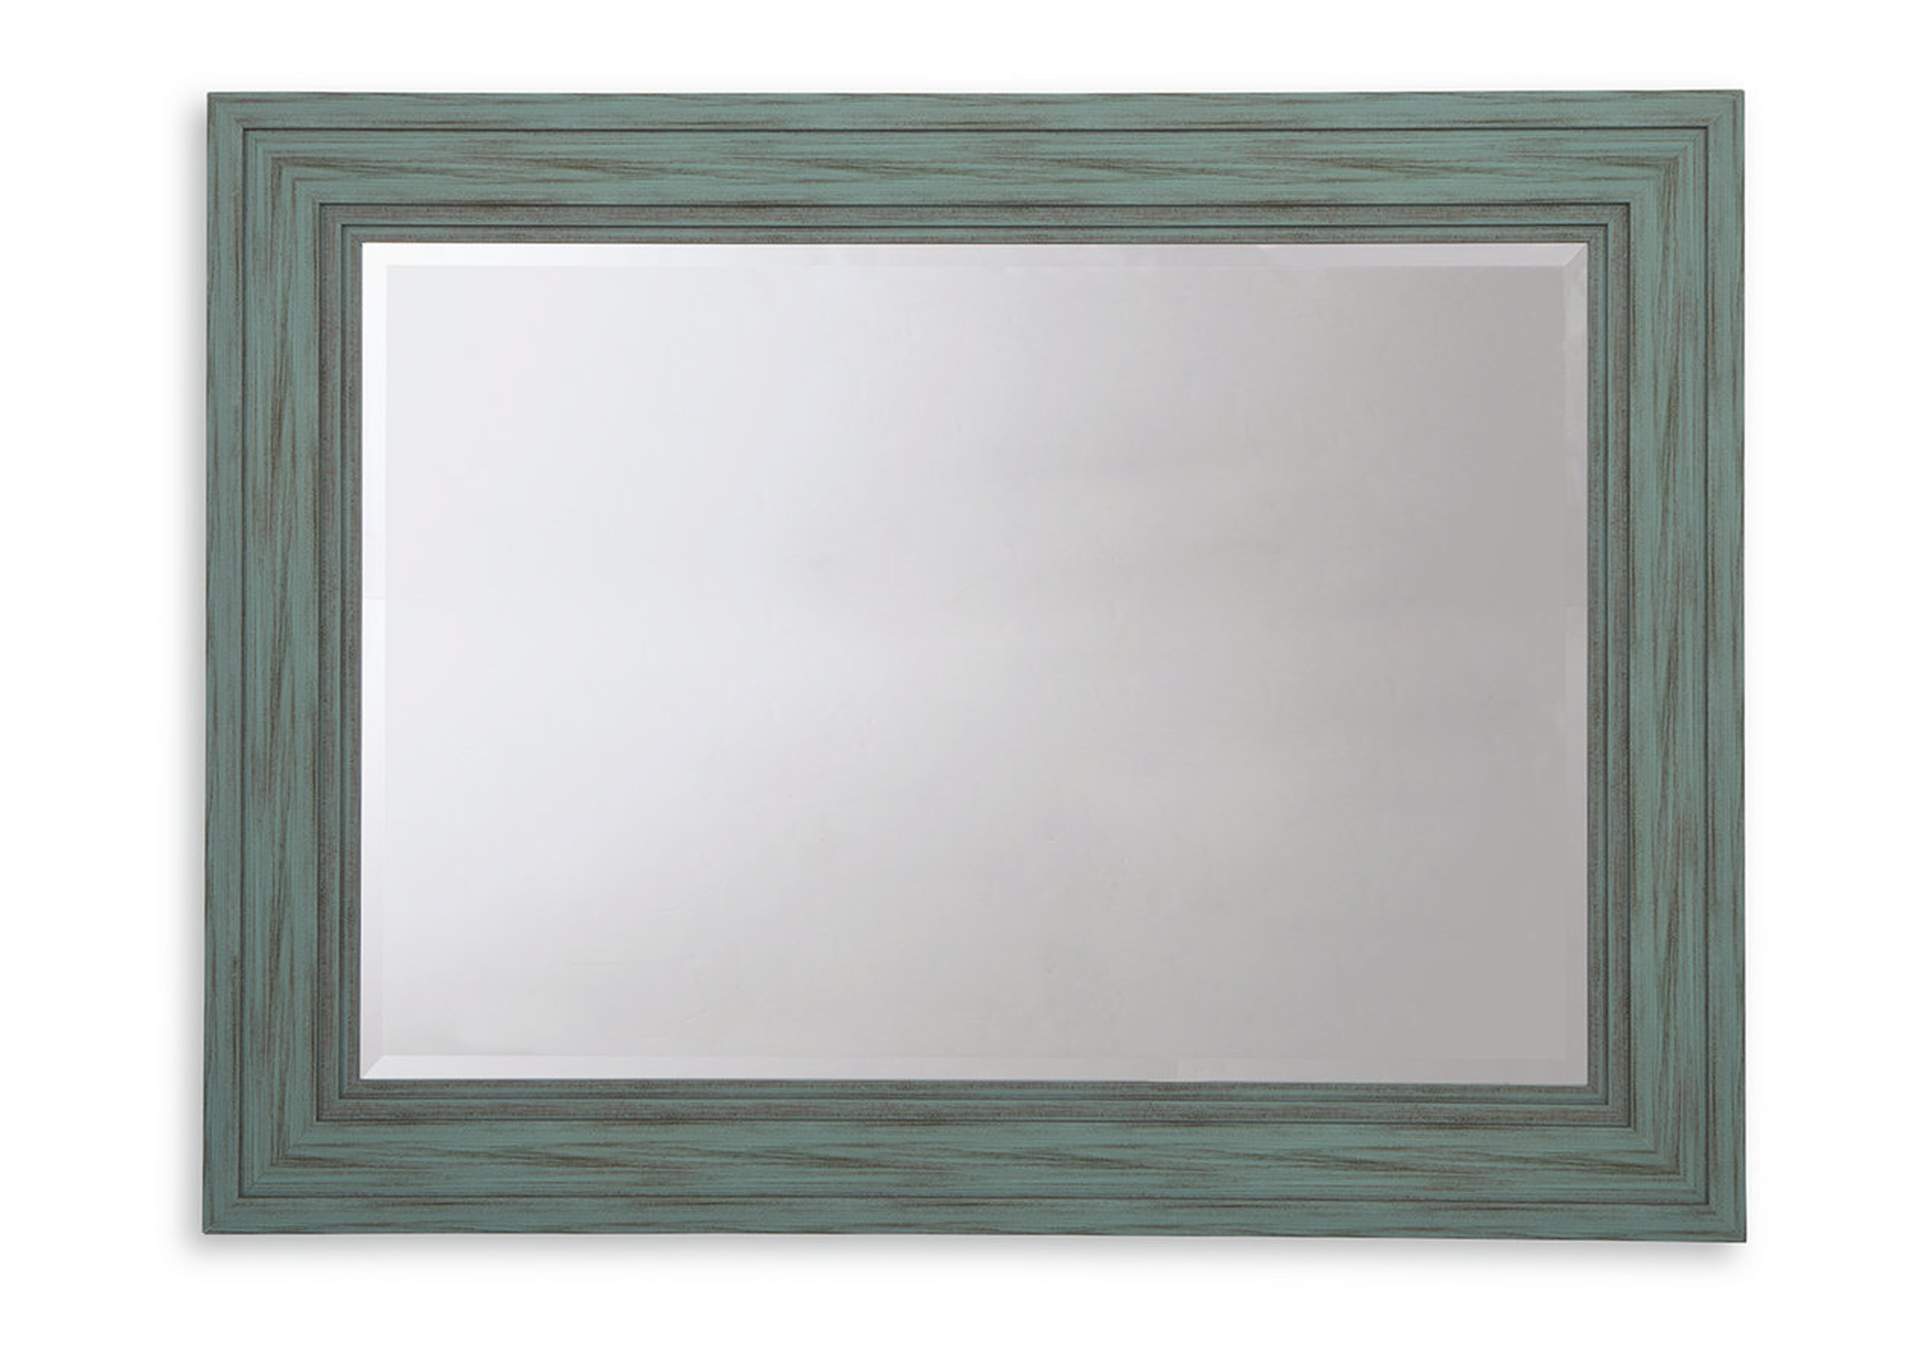 Jacee Accent Mirror,Signature Design By Ashley